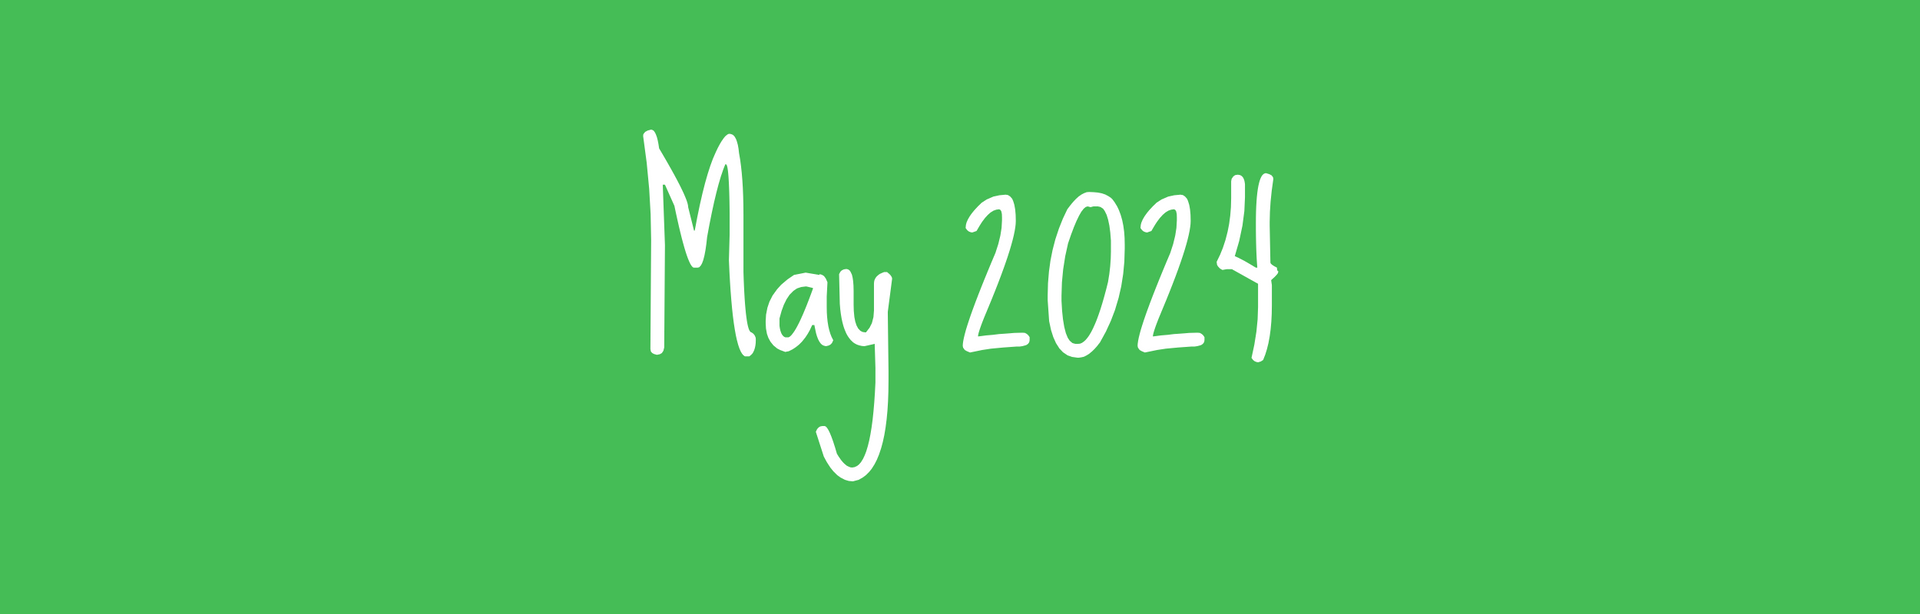 the word may is written in white chalk on a green background .